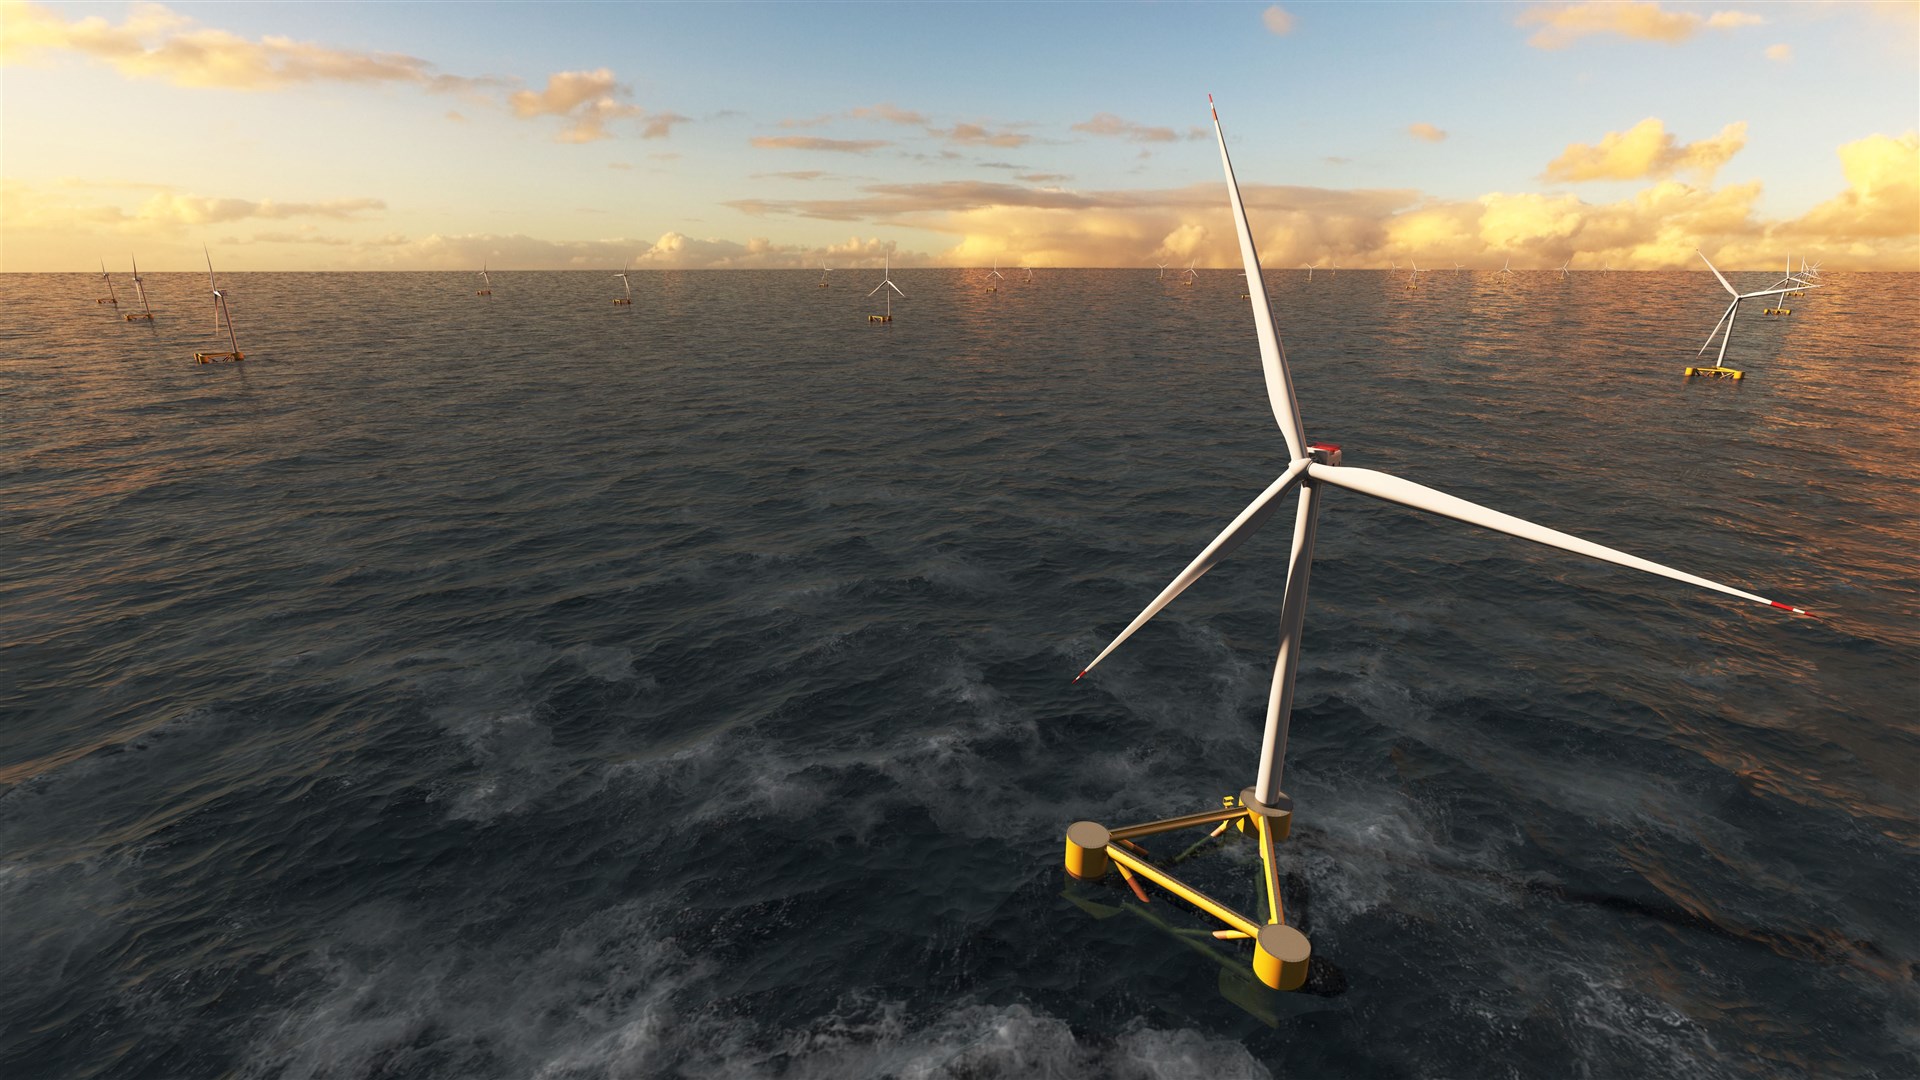 Ocean Winds and Aker Offshore Wind have jointly submitted bids, as part of the ScotWind process, for several sites in the Outer Moray Firth.